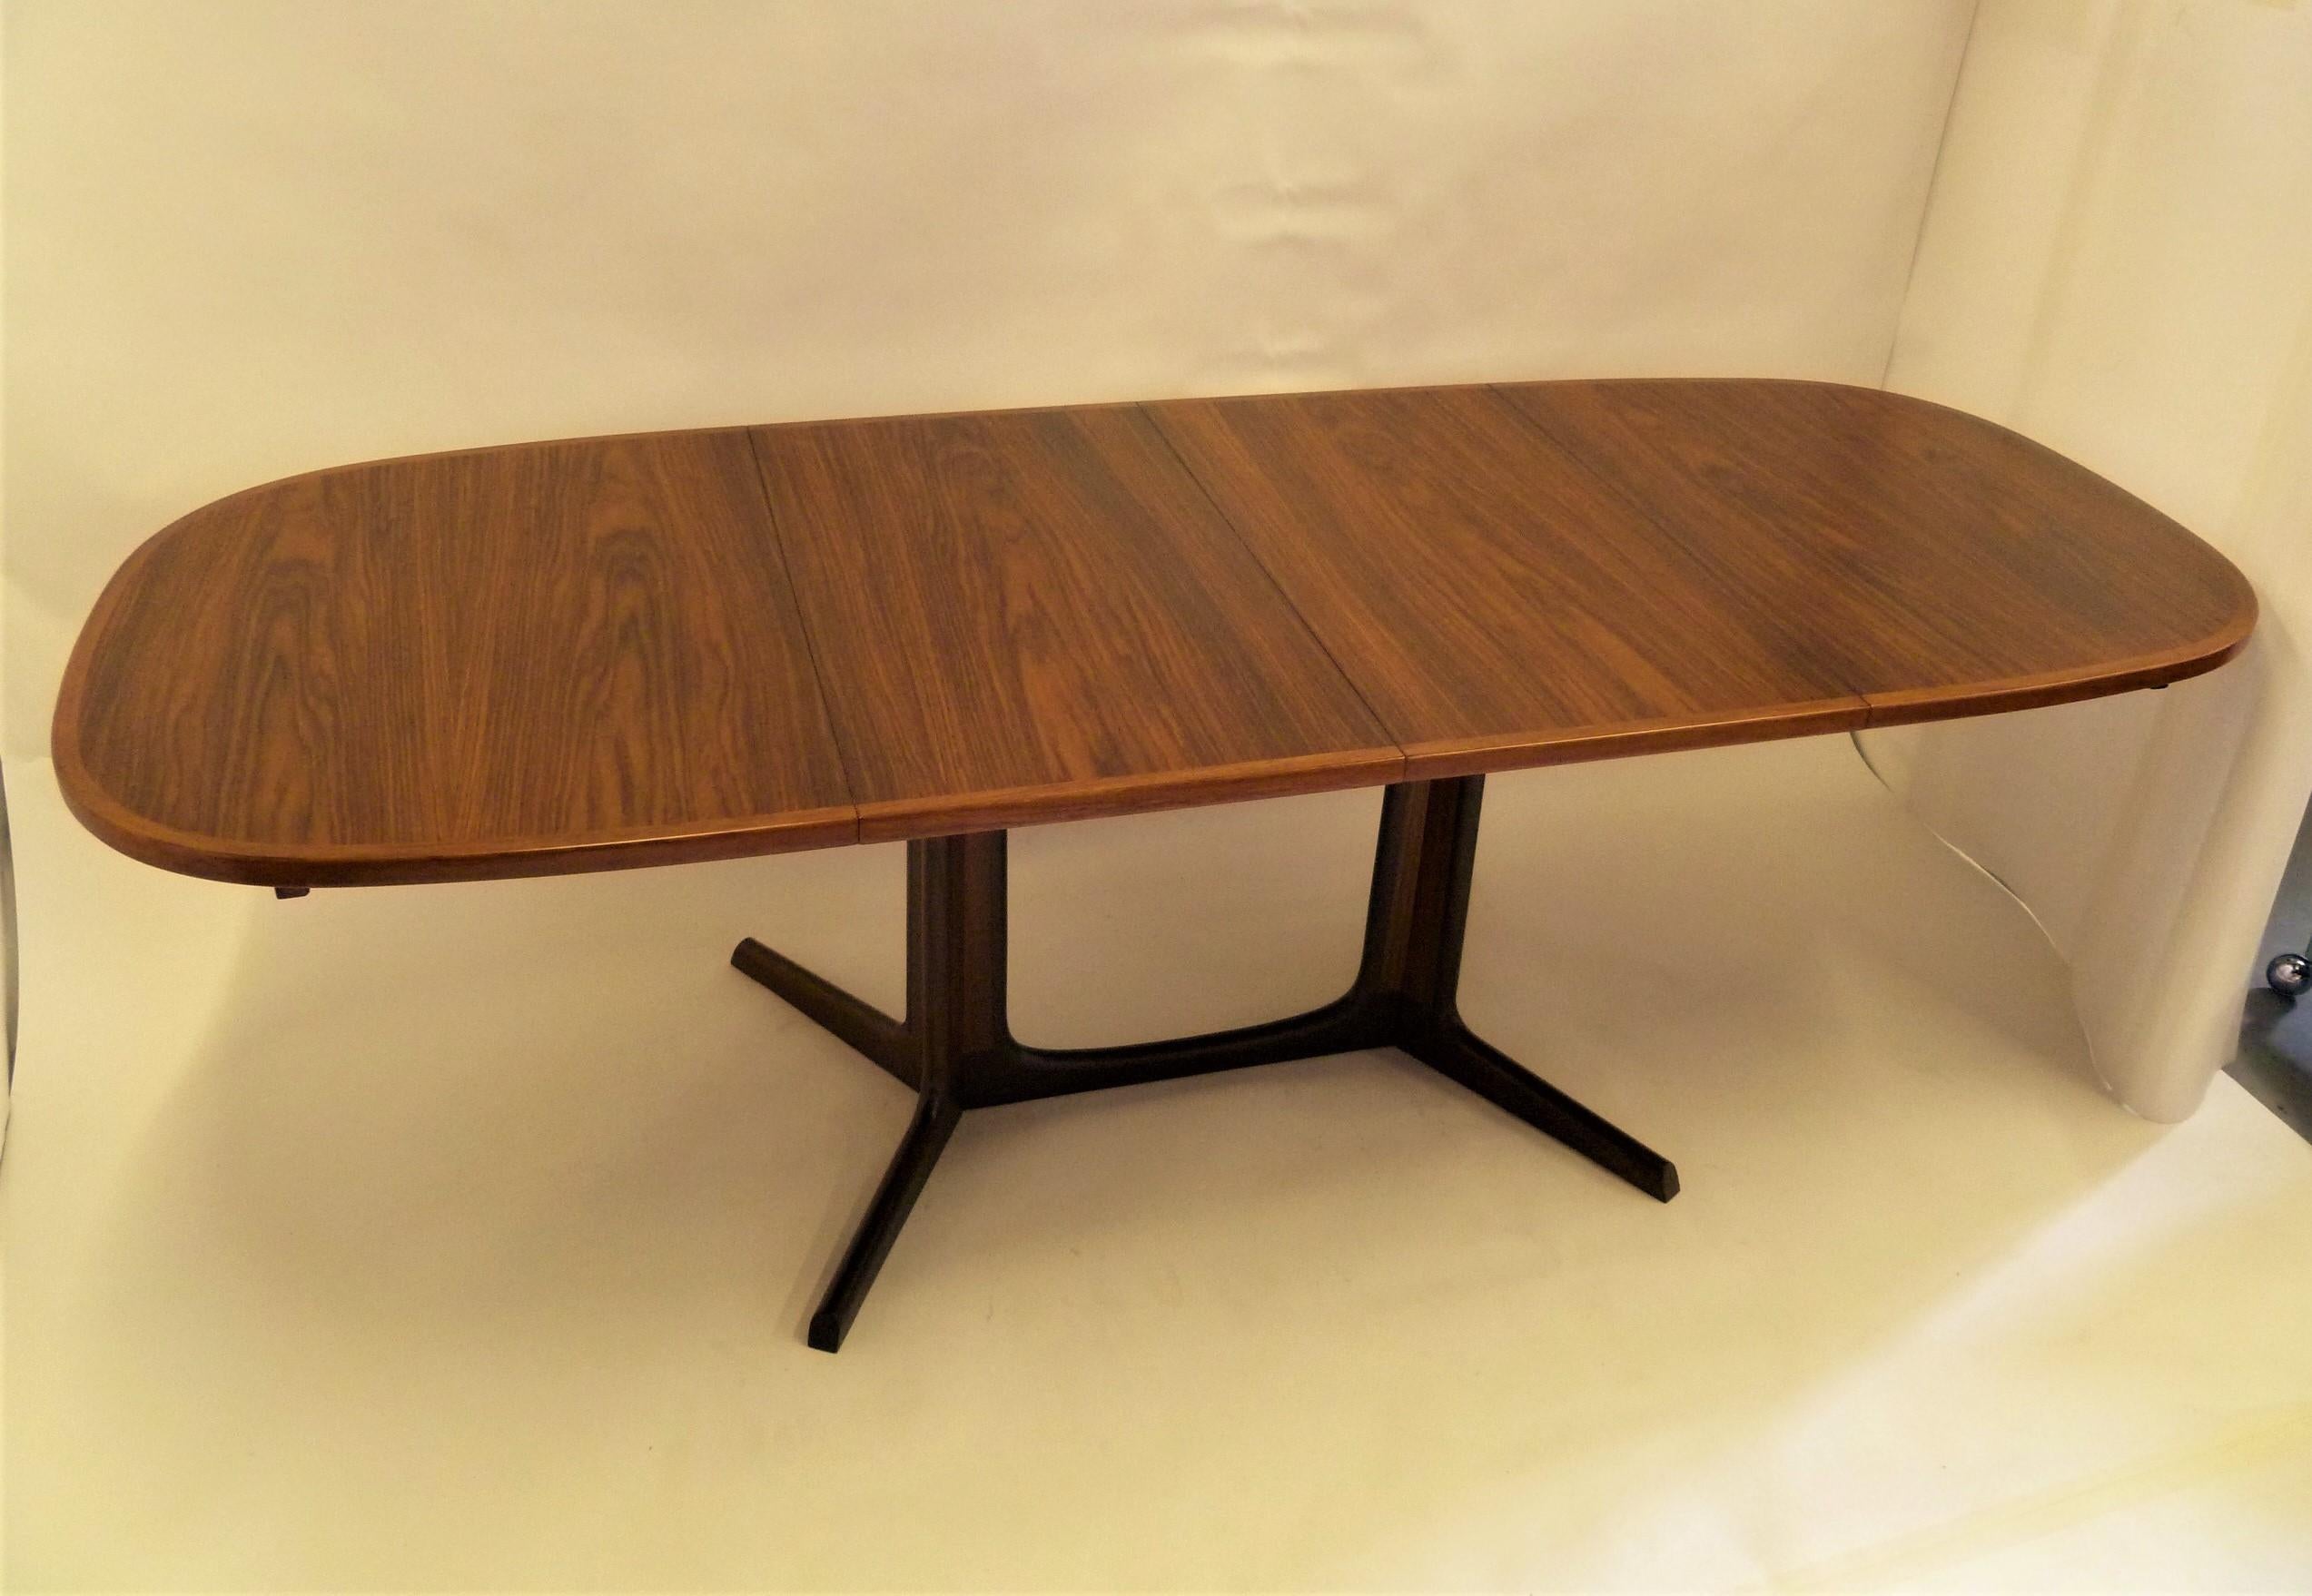 Beautifully figured Danish rosewood dining table by Gudme Møbelfabrik with two leaves for lengthening.
Often attributed to Niels Otto Møller. Fully professionally restored. Gorgeous finish.

Measurements: 53 1/2 inches x 35 1/2 inches x 28 1/4